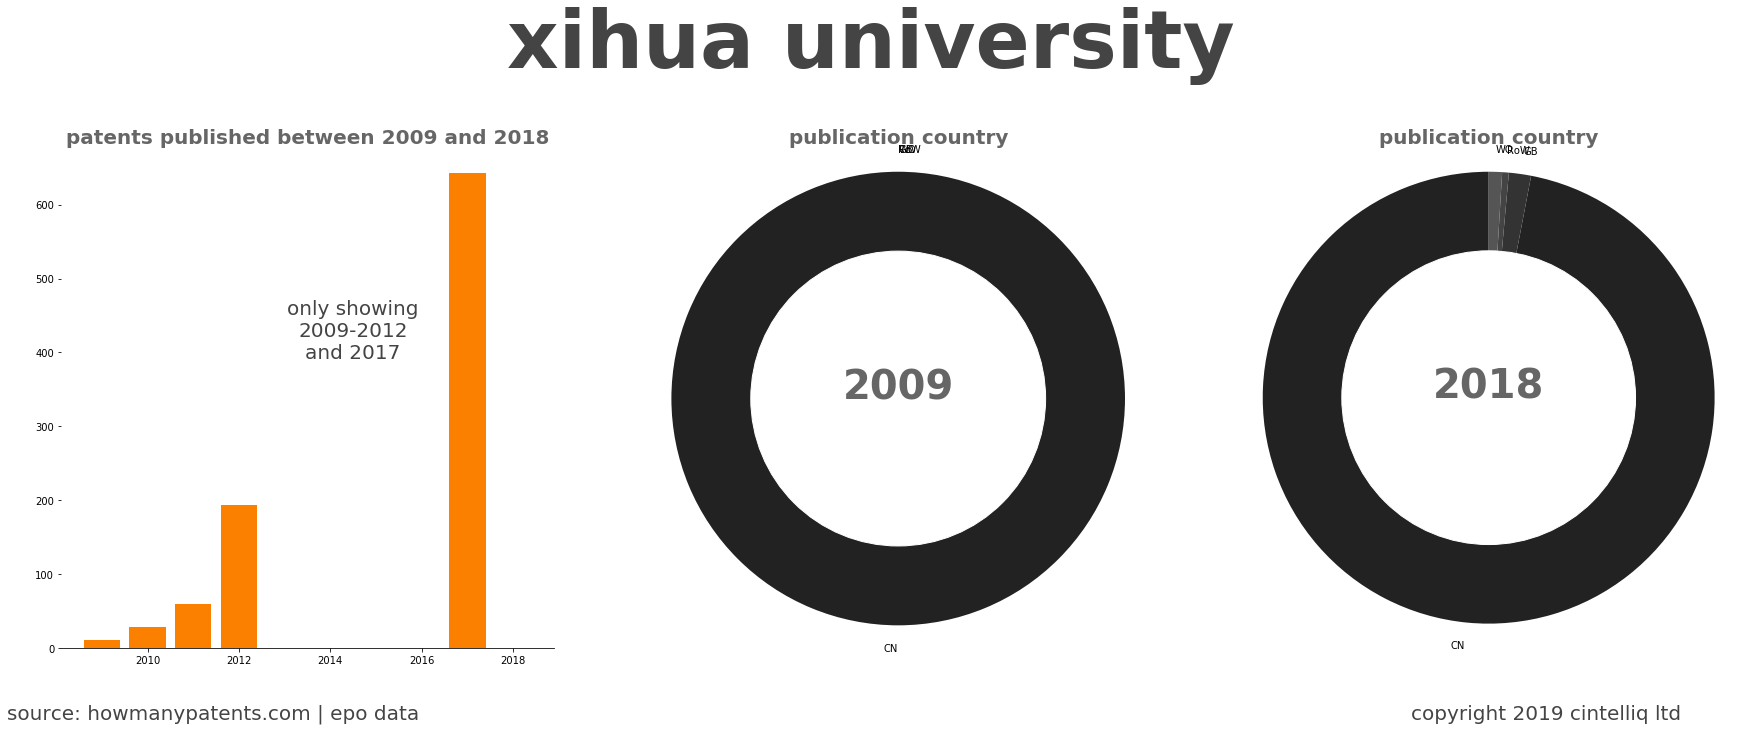 summary of patents for Xihua University